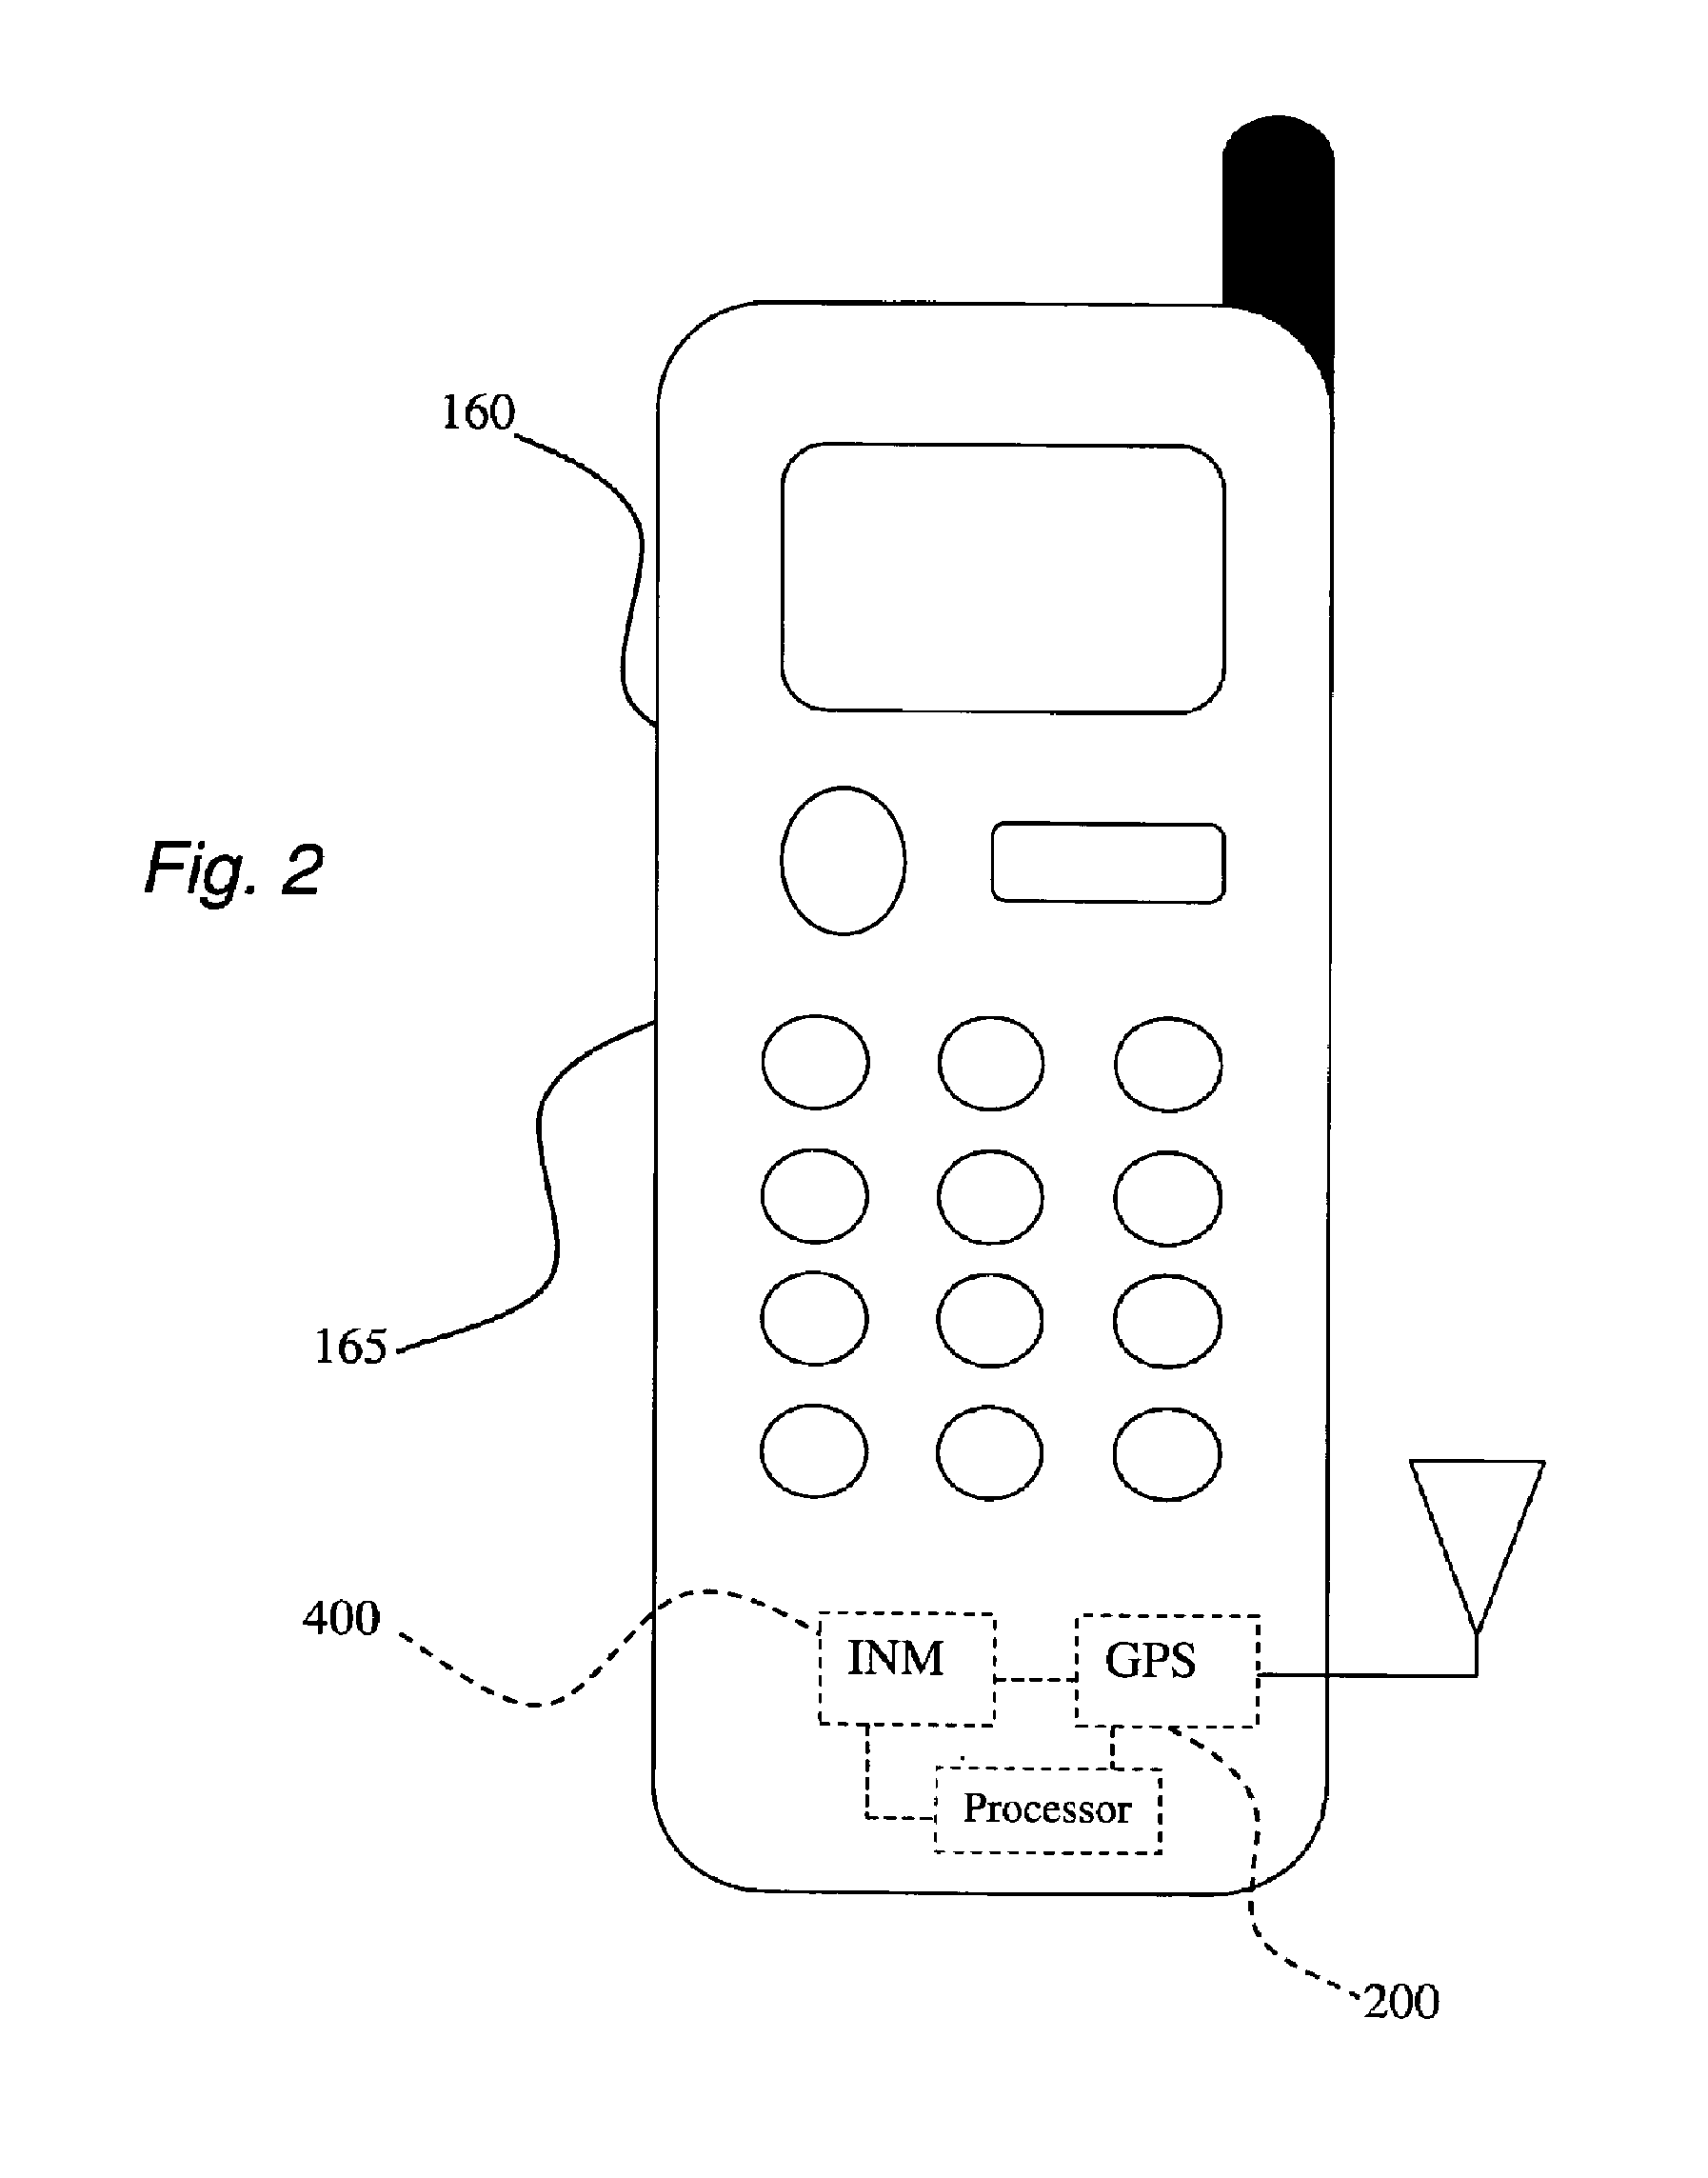 Method for identifying the georgrapic location of a router